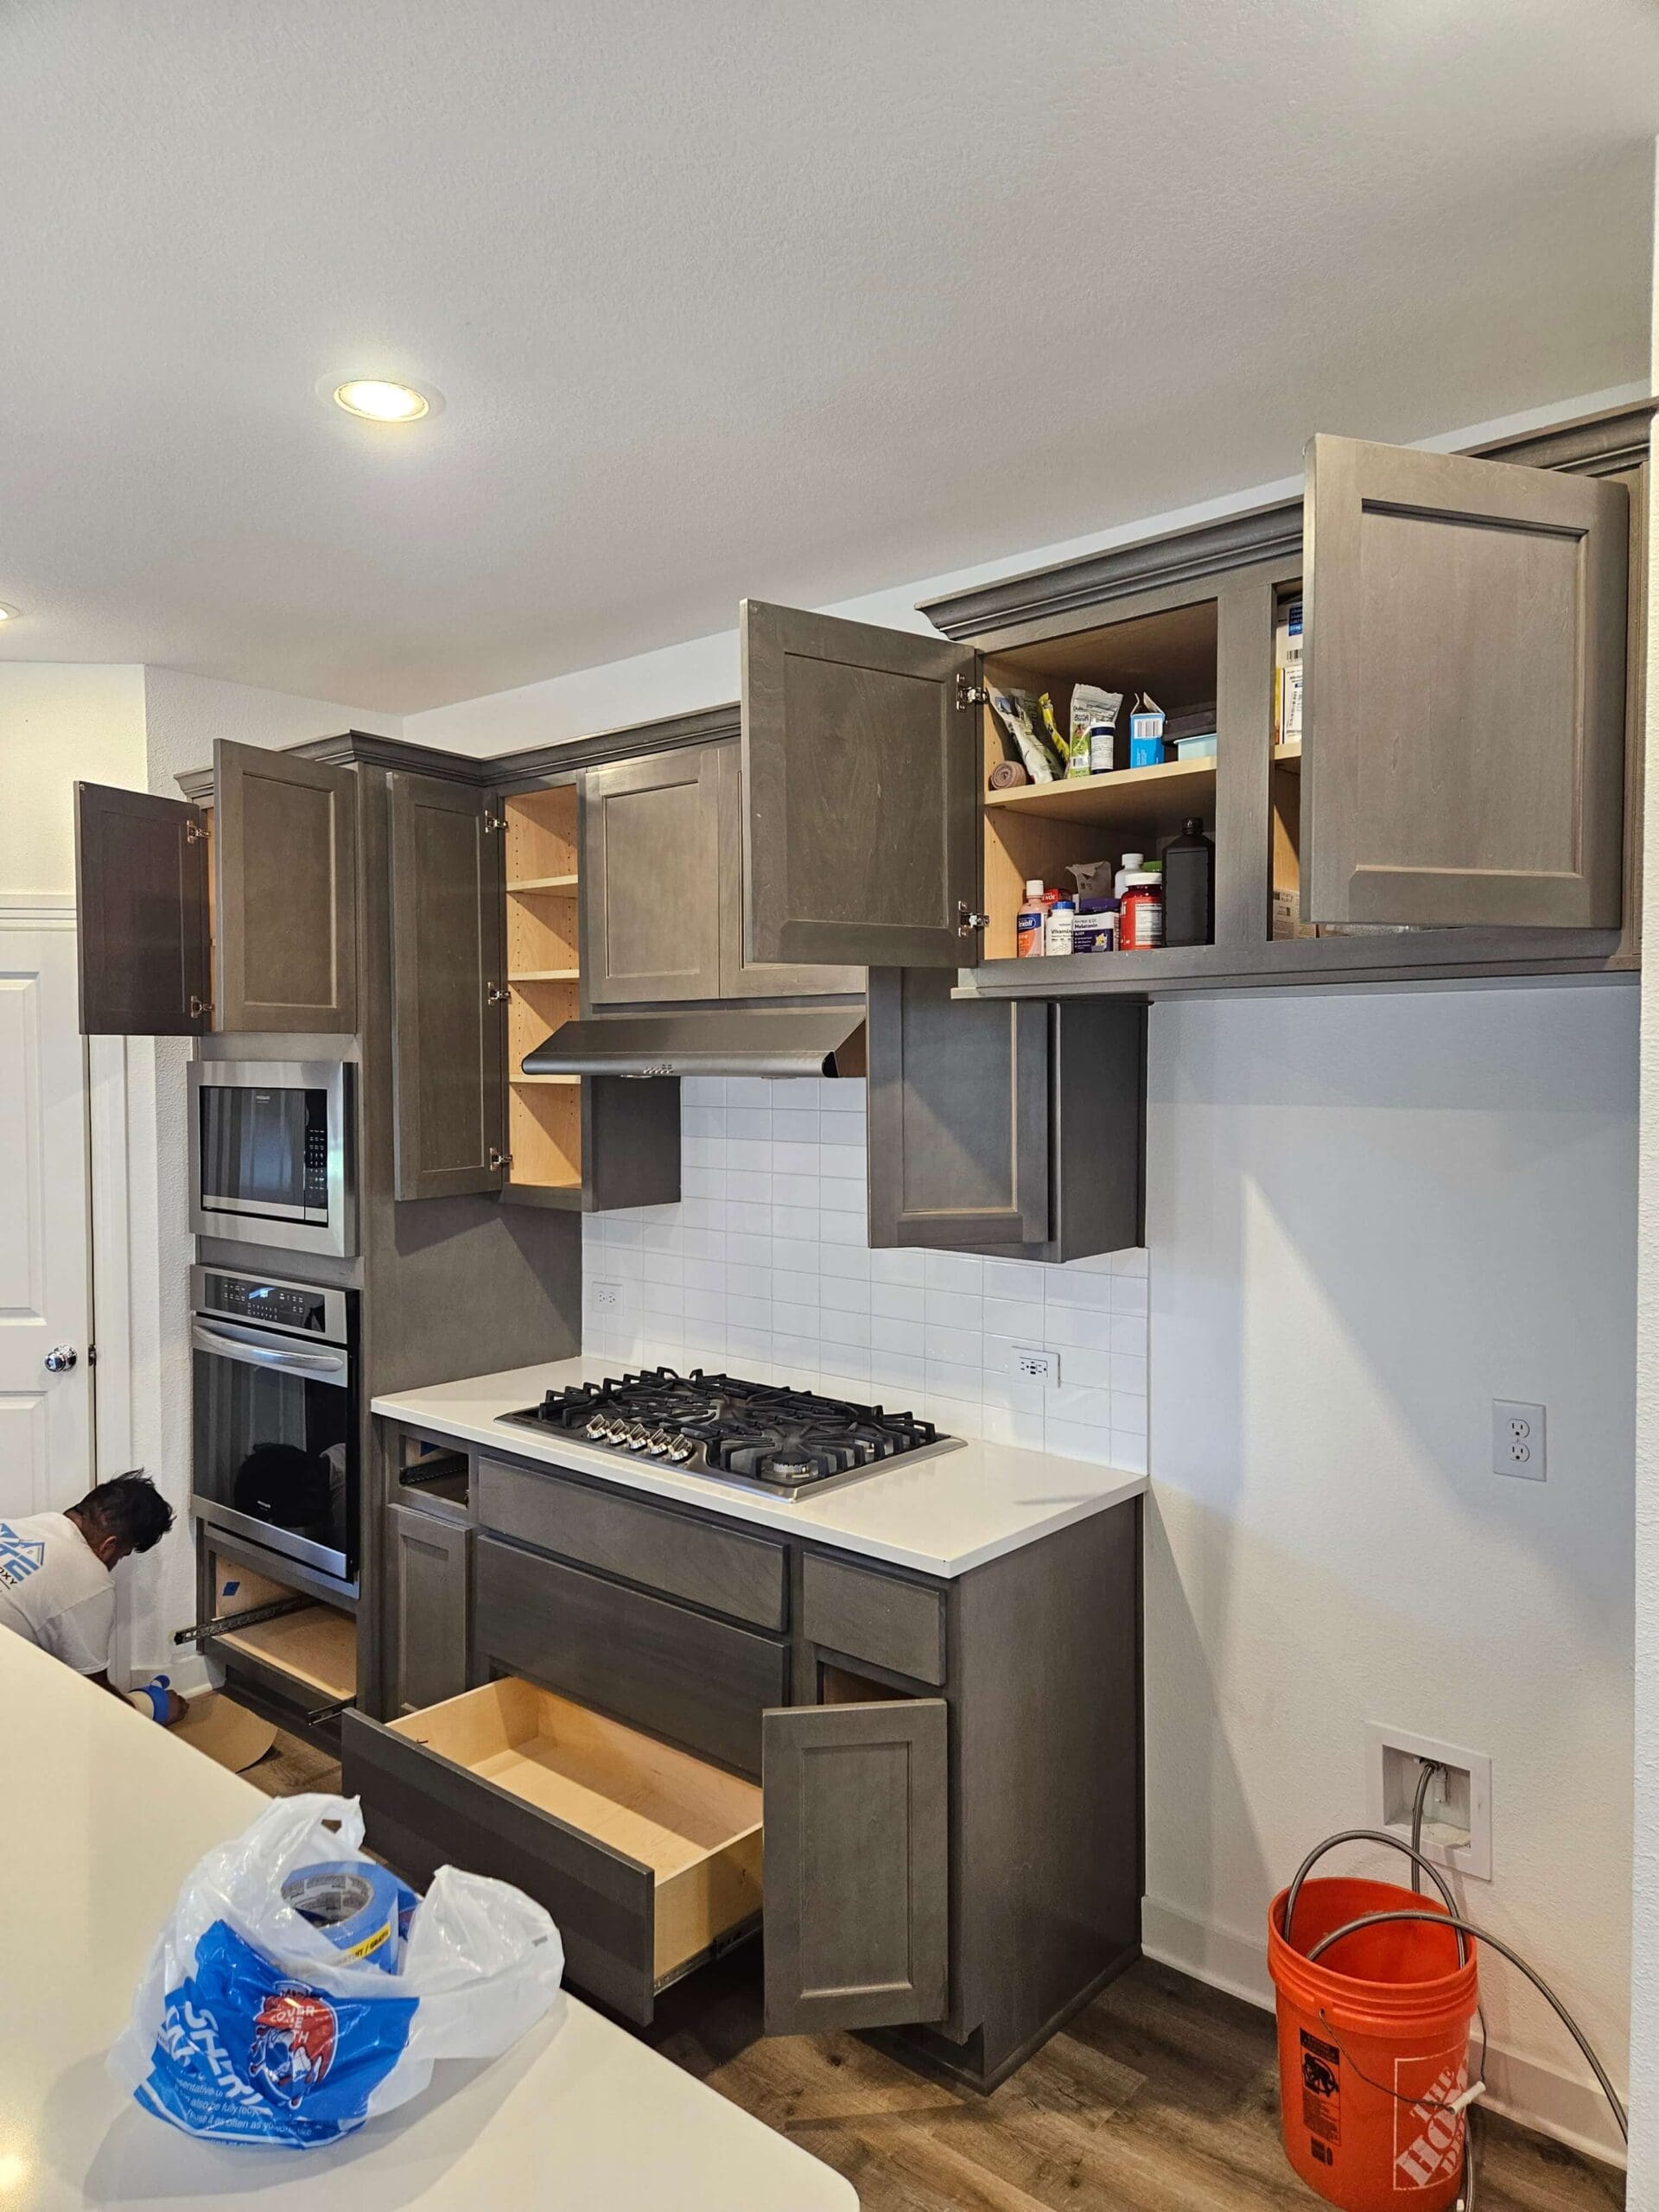 Grey kitchen cabinets against white painted walls